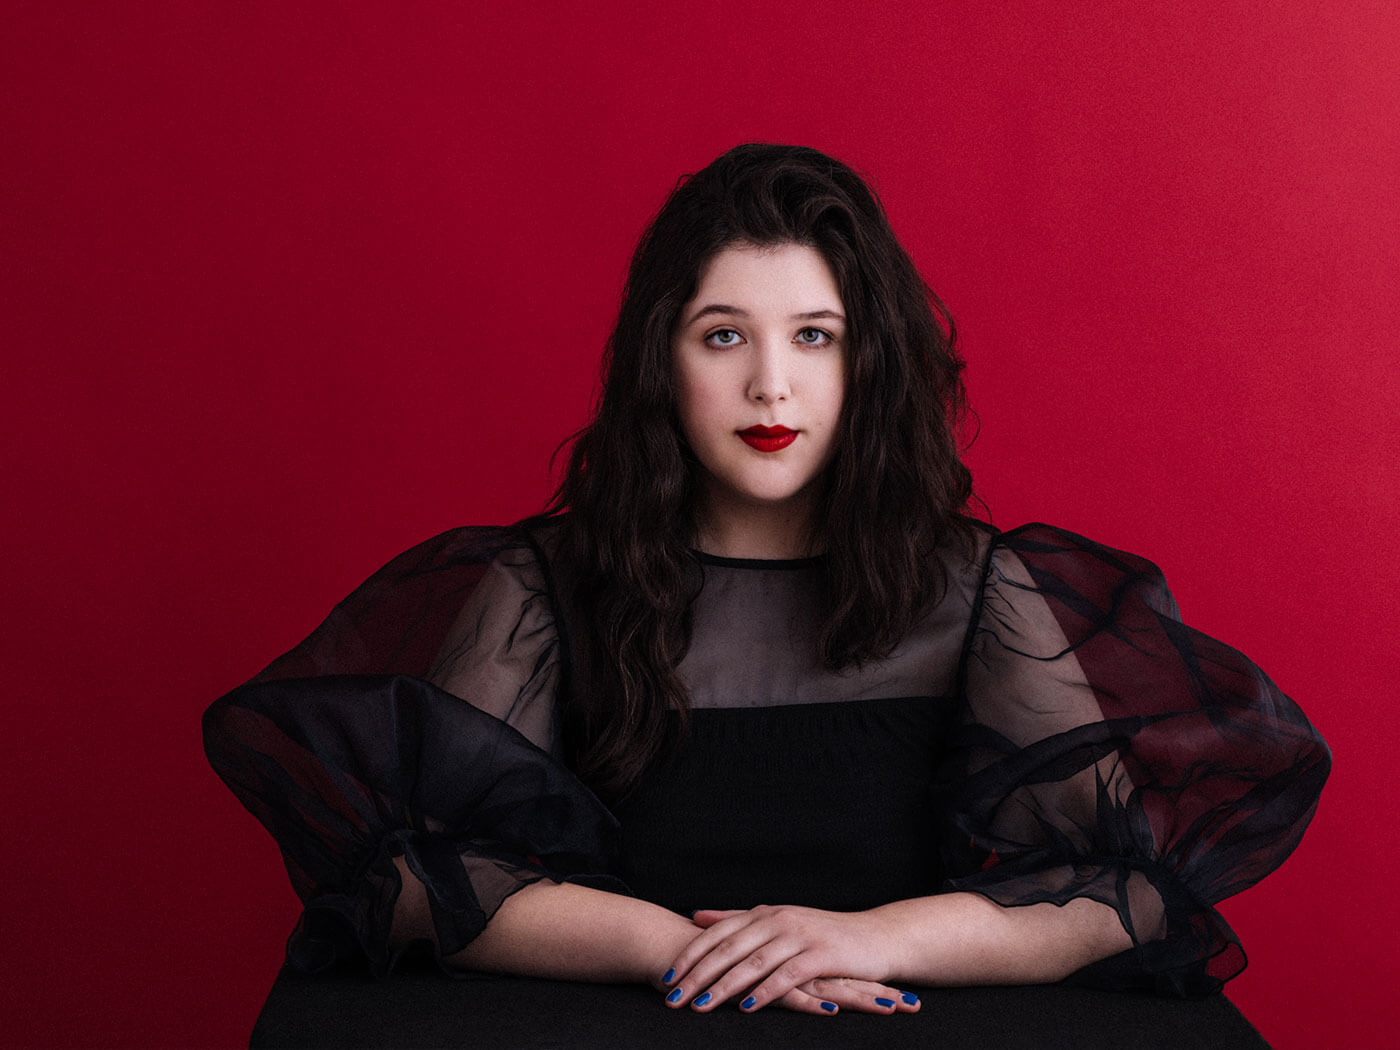 Lucy Dacus’ new single Brando arrives already tabbed out